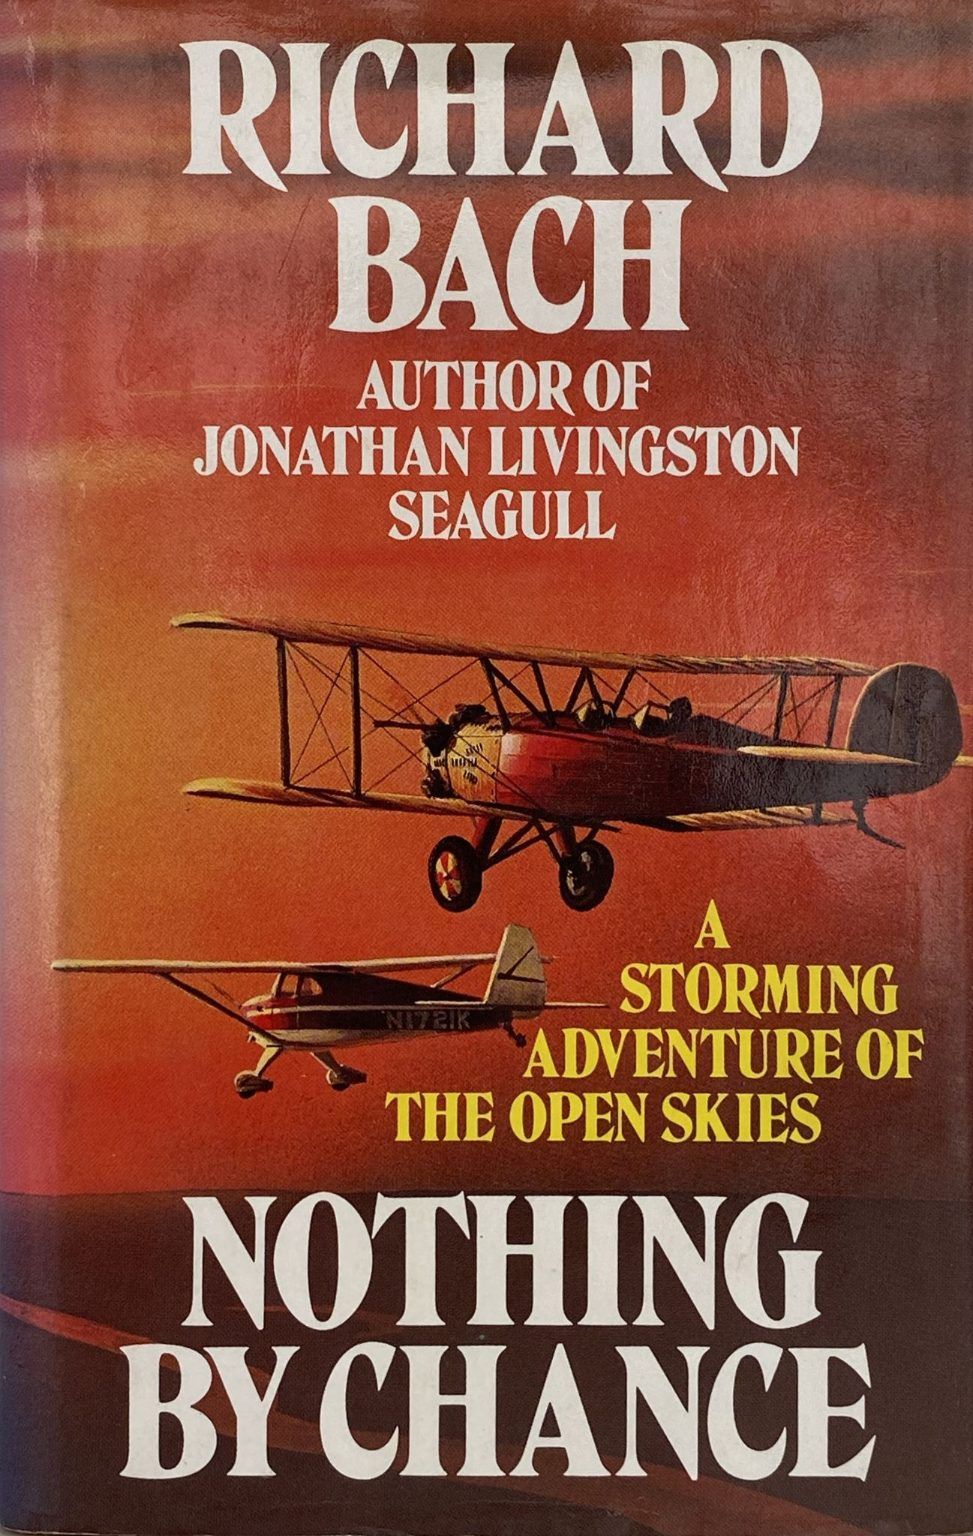 NOTHING BY CHANCE: A Storming Adventure of the Open Skies